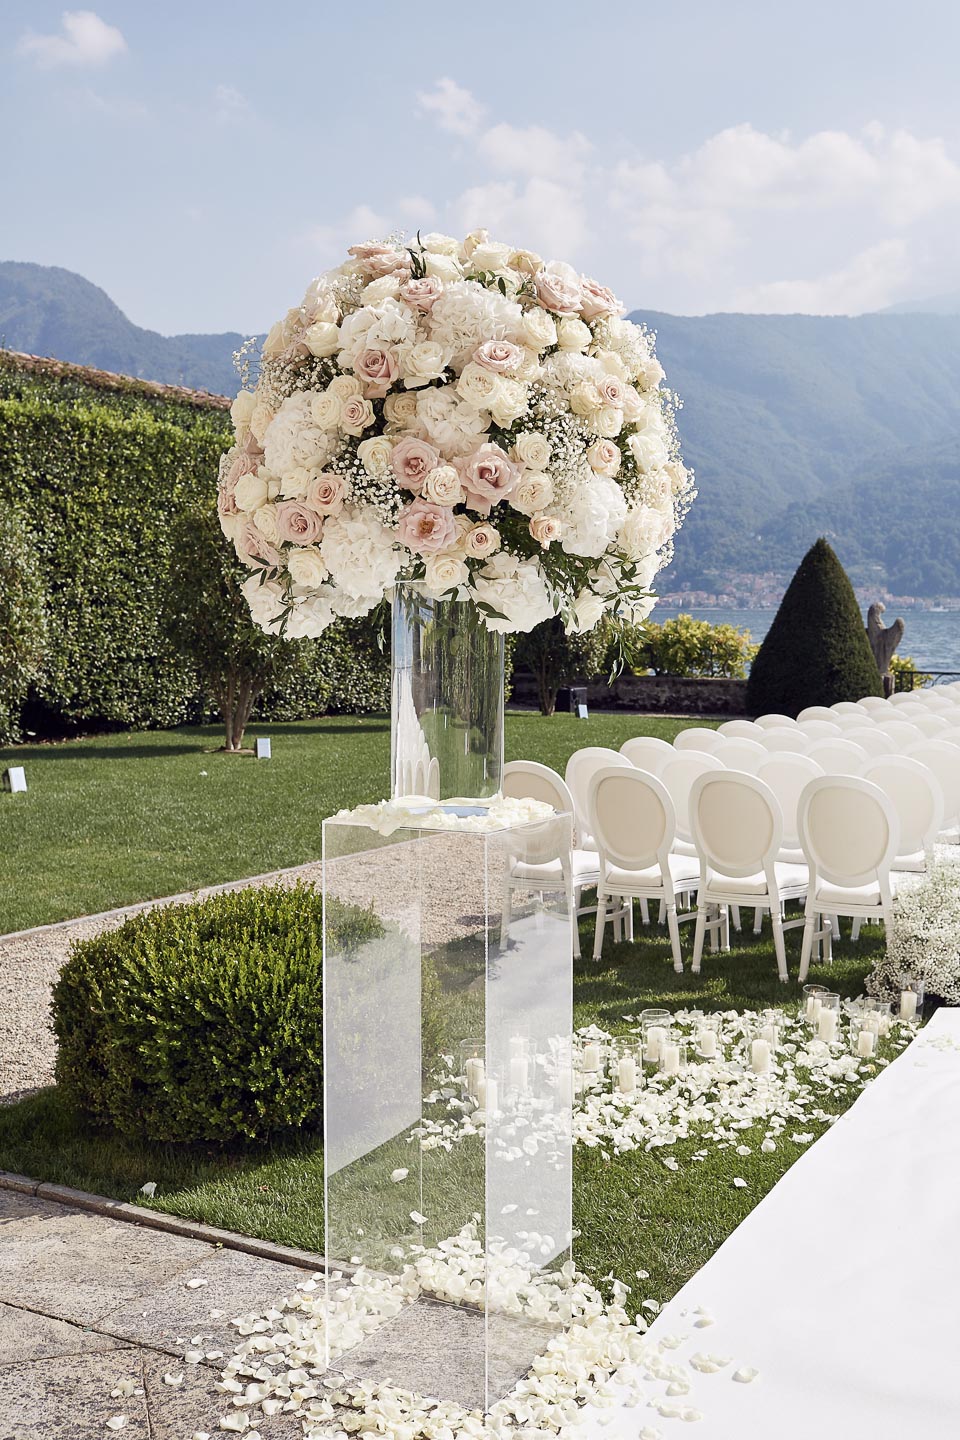 villa balbiano lake como top choice for couples getting married best location wedding venue italy